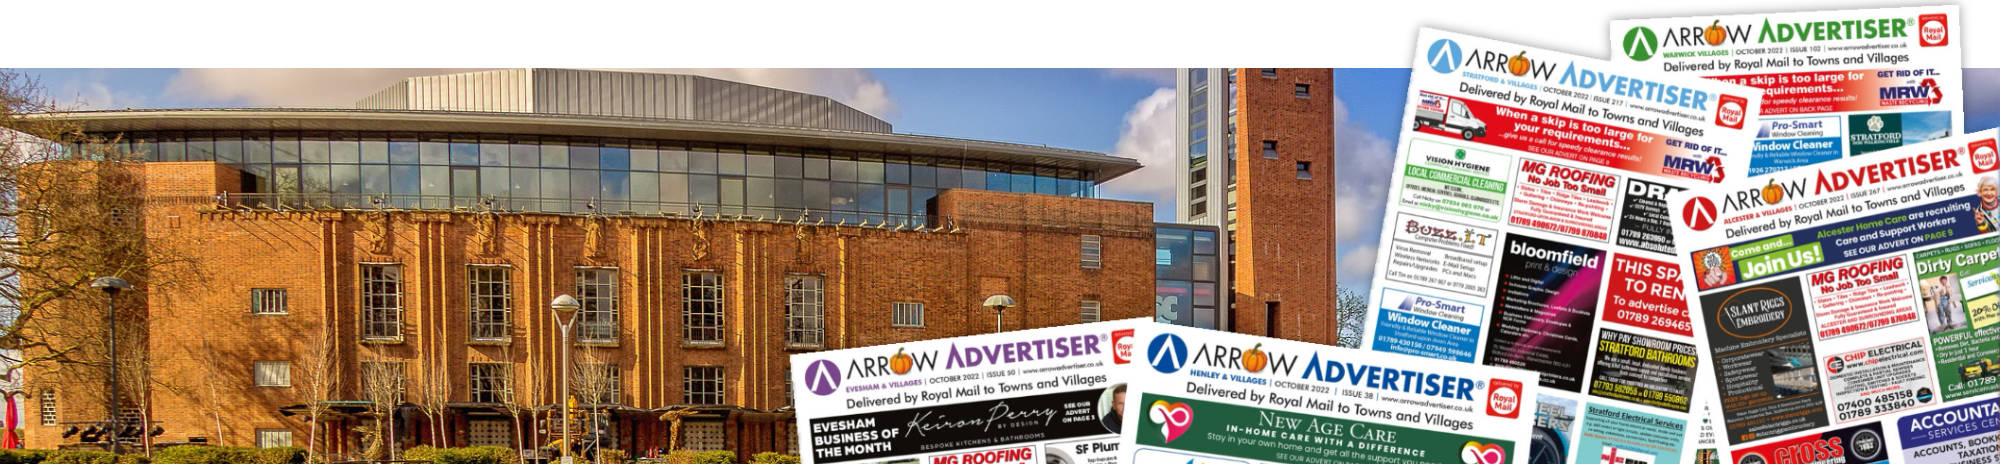 The Arrow Advertiser - Why advertise with us